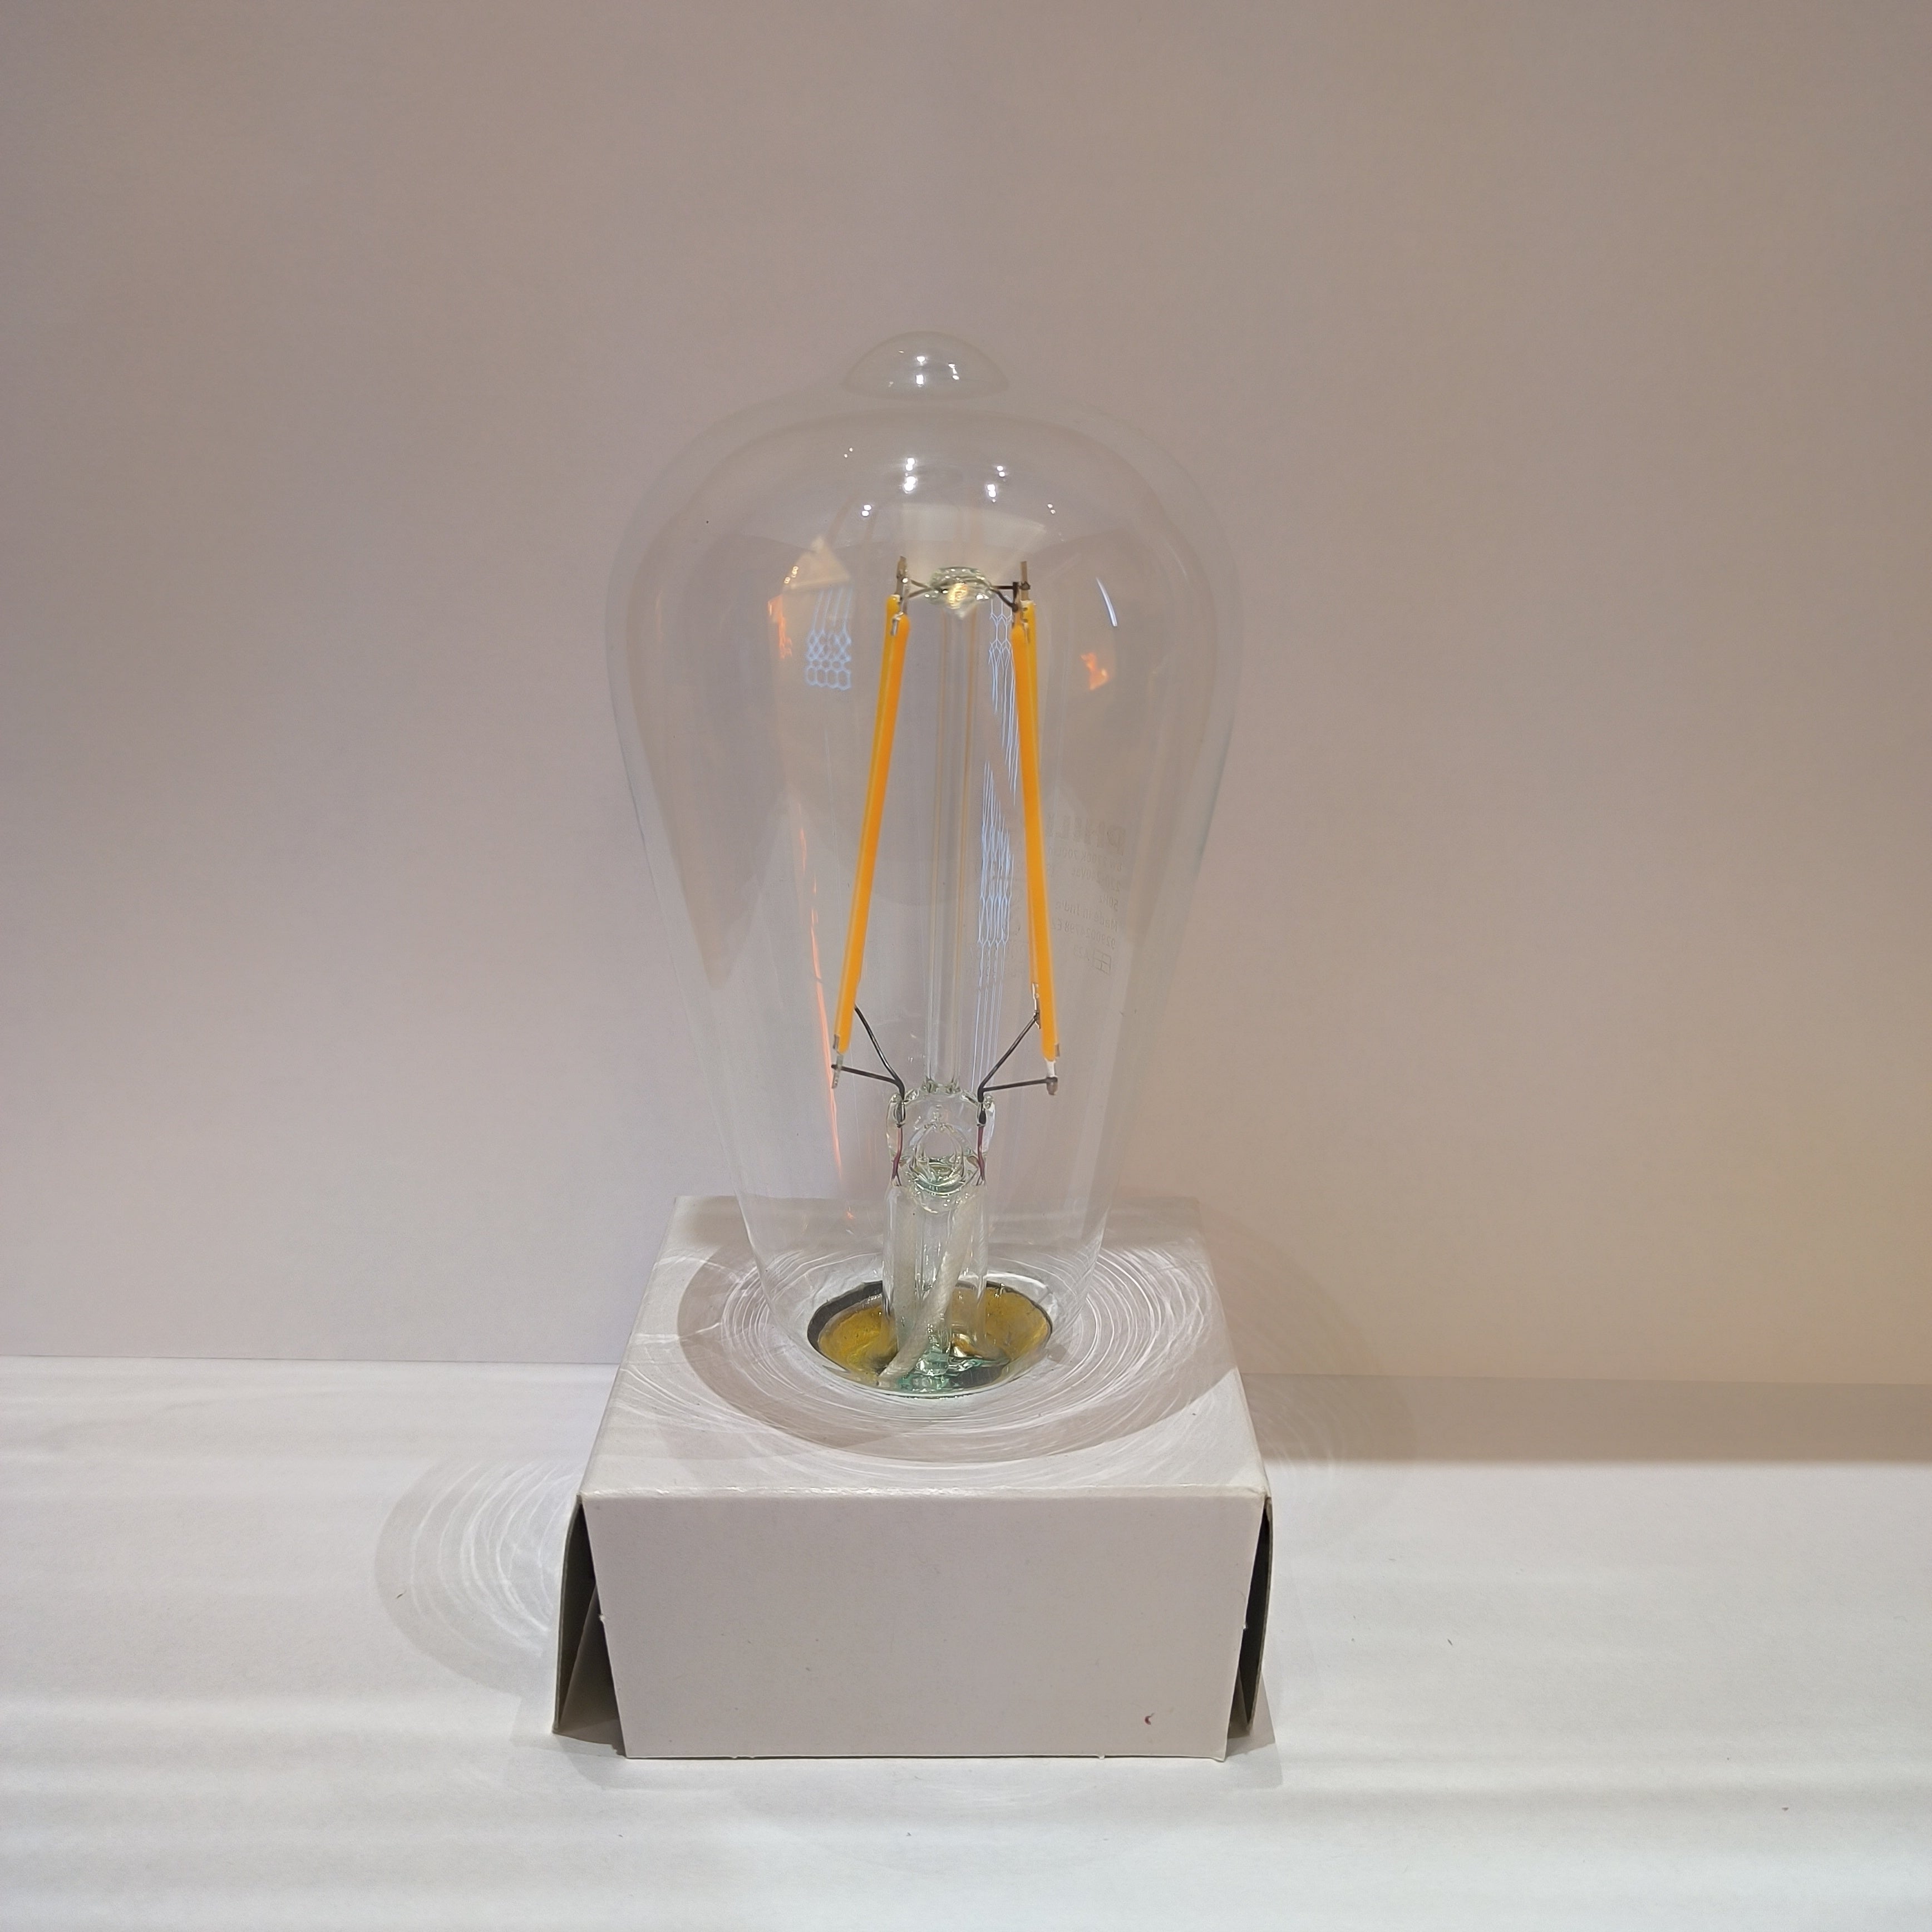 Philips E-27 Filament Lamp Warm White ST 64 Bulb - 8w LED at the Best Price